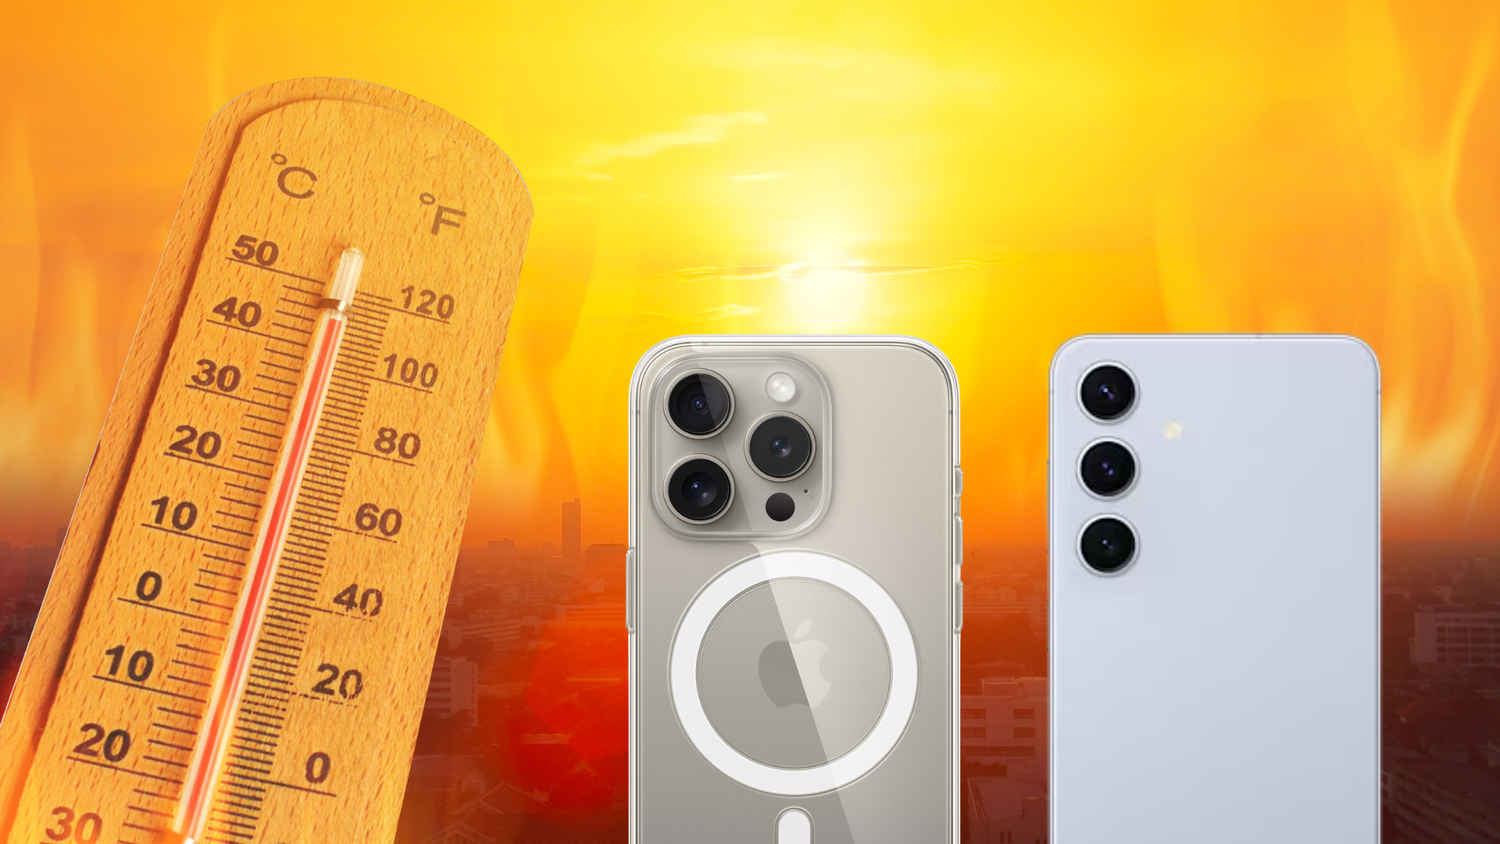 Delhi’s temperature goes up to 52.9C: Here’s how to protect smartphones amid heatwave